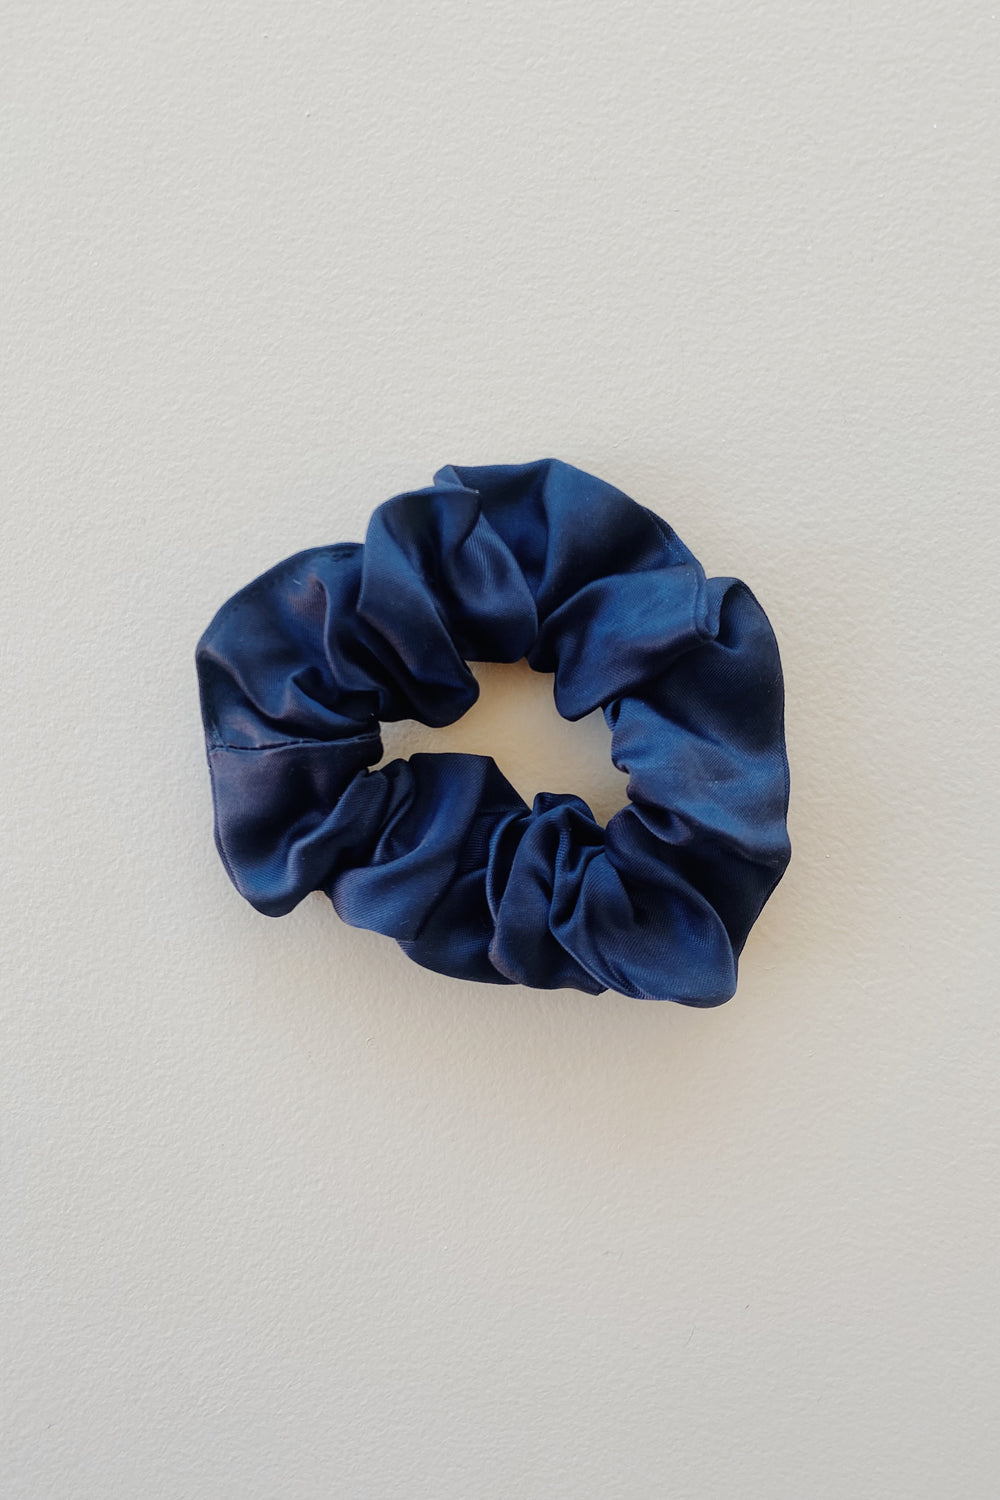 Silky Scrunchie in Midnight - Whimsy & Row